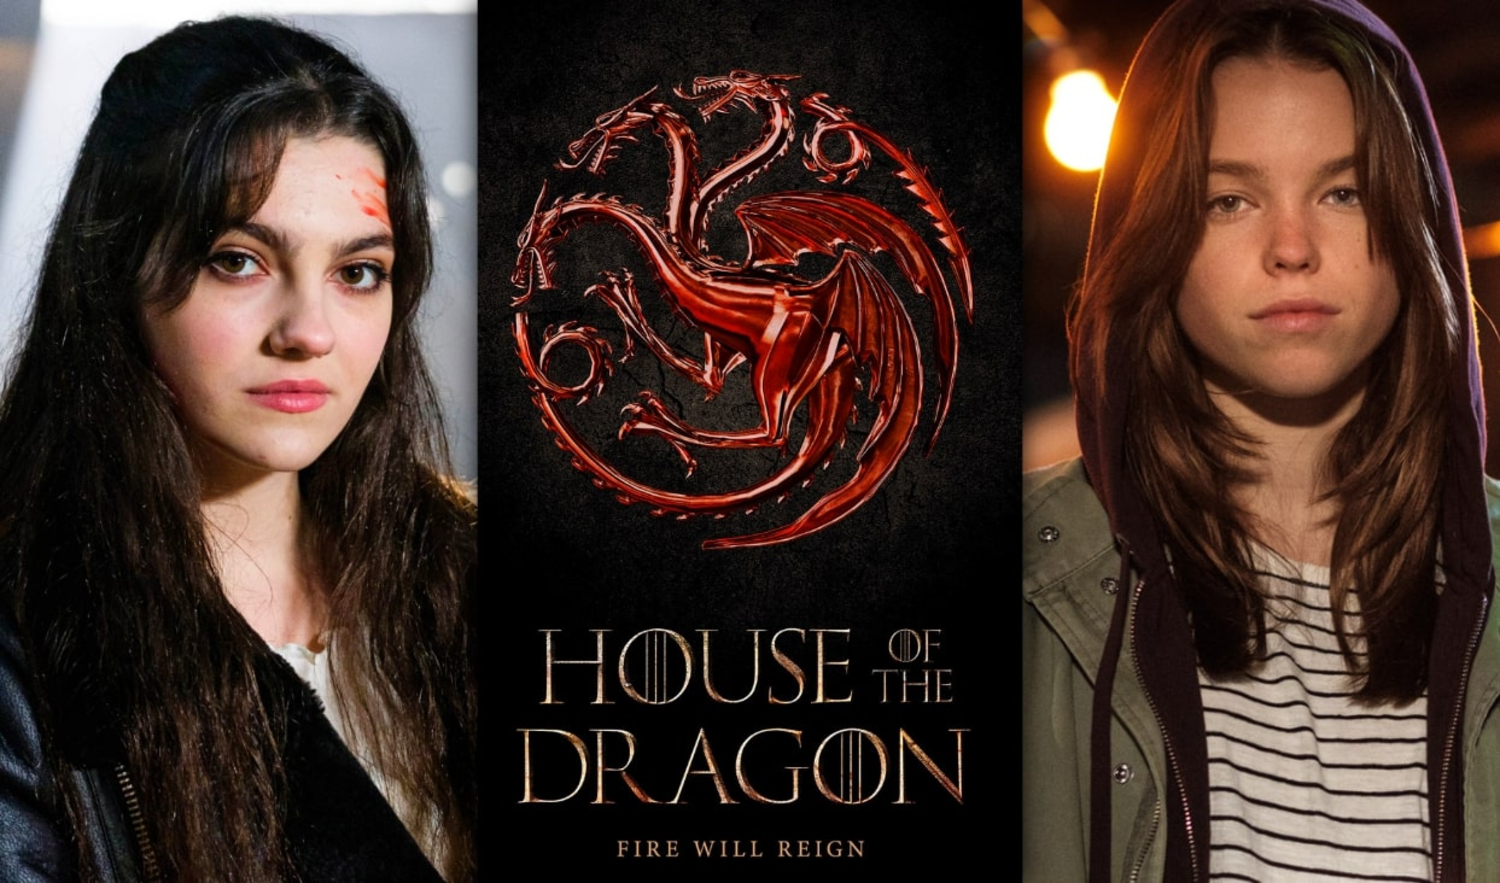 Photo of HBO’s ‘House of The Dragon’ Series Adds Young Actresses Emily Carey & Milly Alcock; ‘Game of Thrones’ Prequel Will Debut In 2022